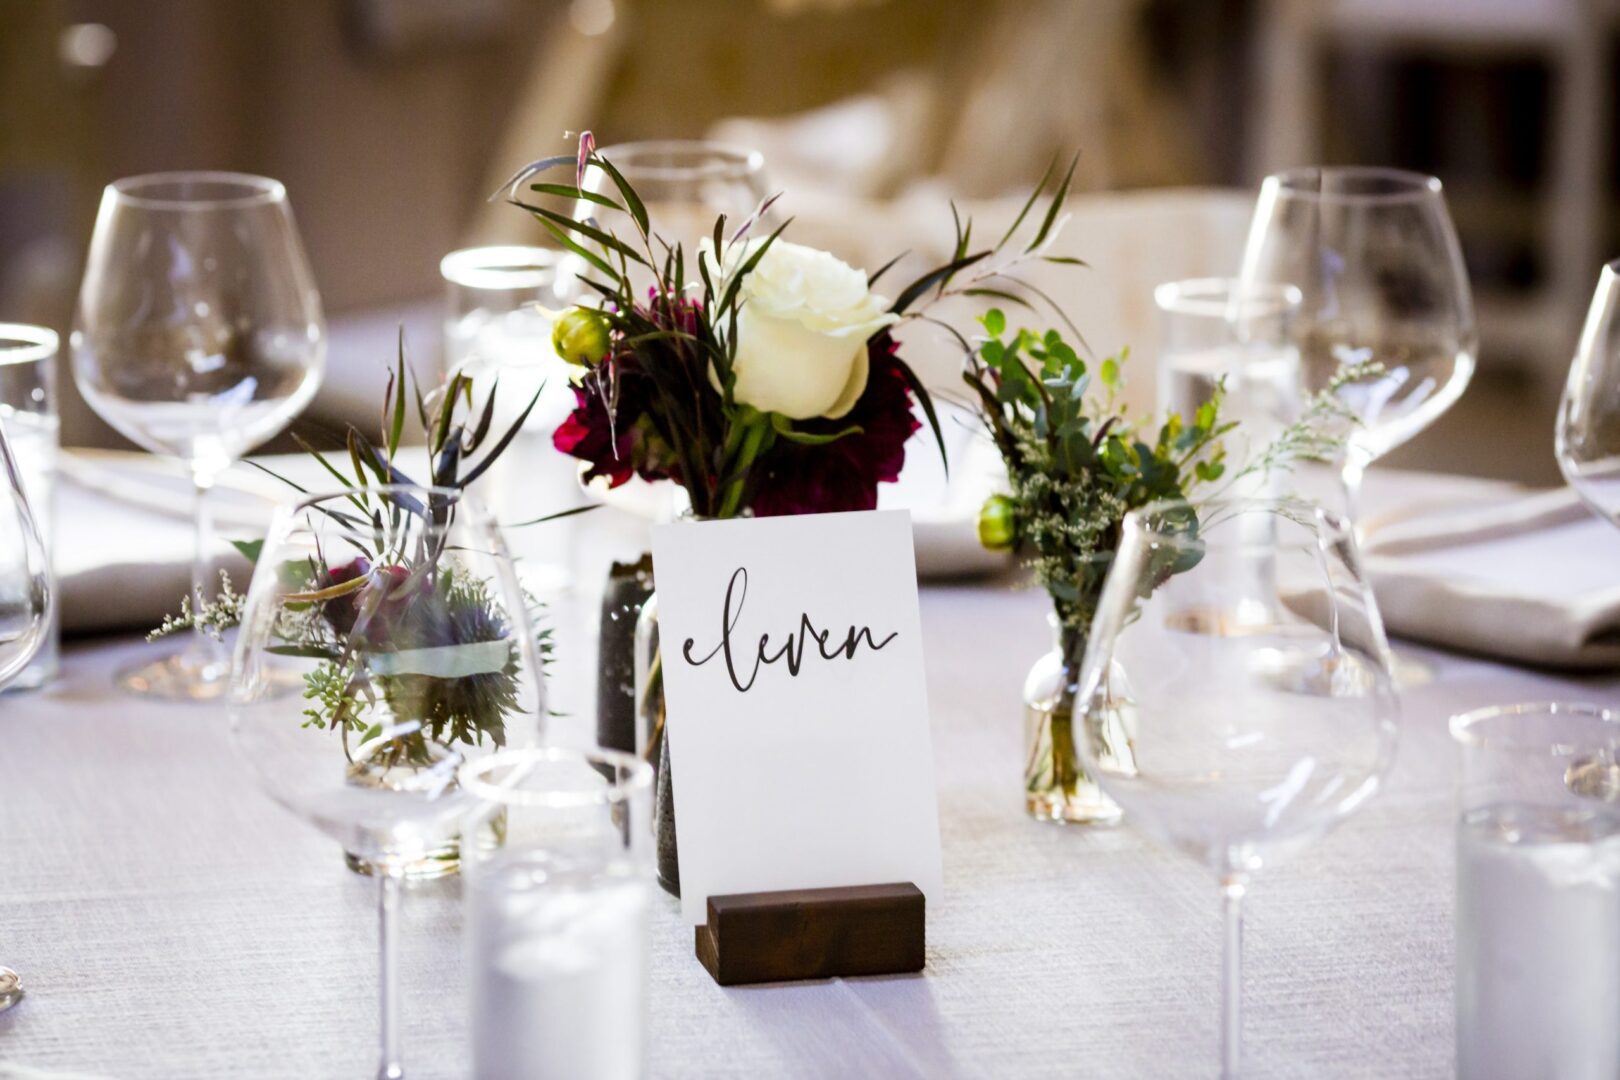 A table setting with wine glasses and flowers.